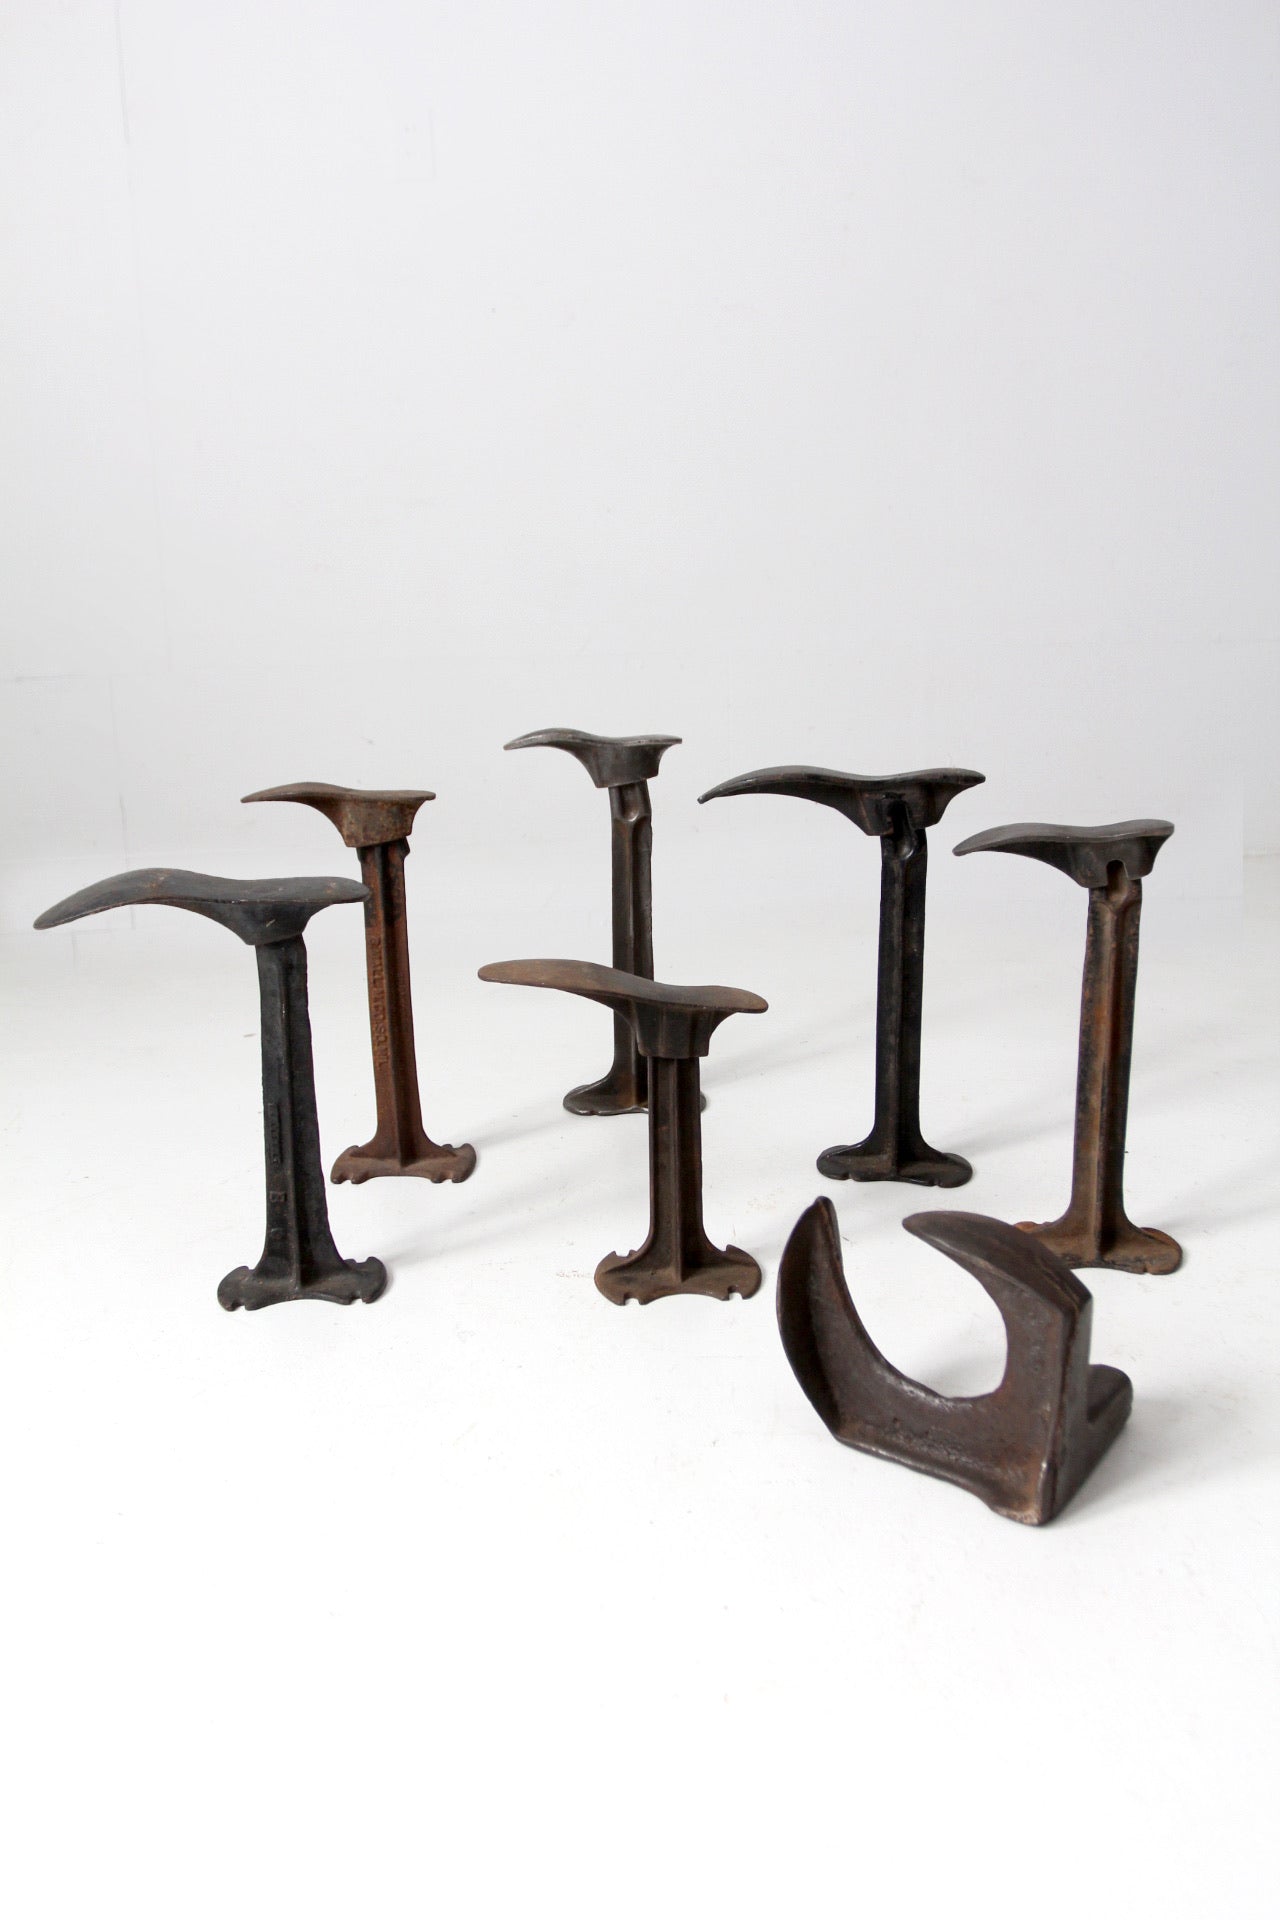 19th century cobblers tools: forms and anvils